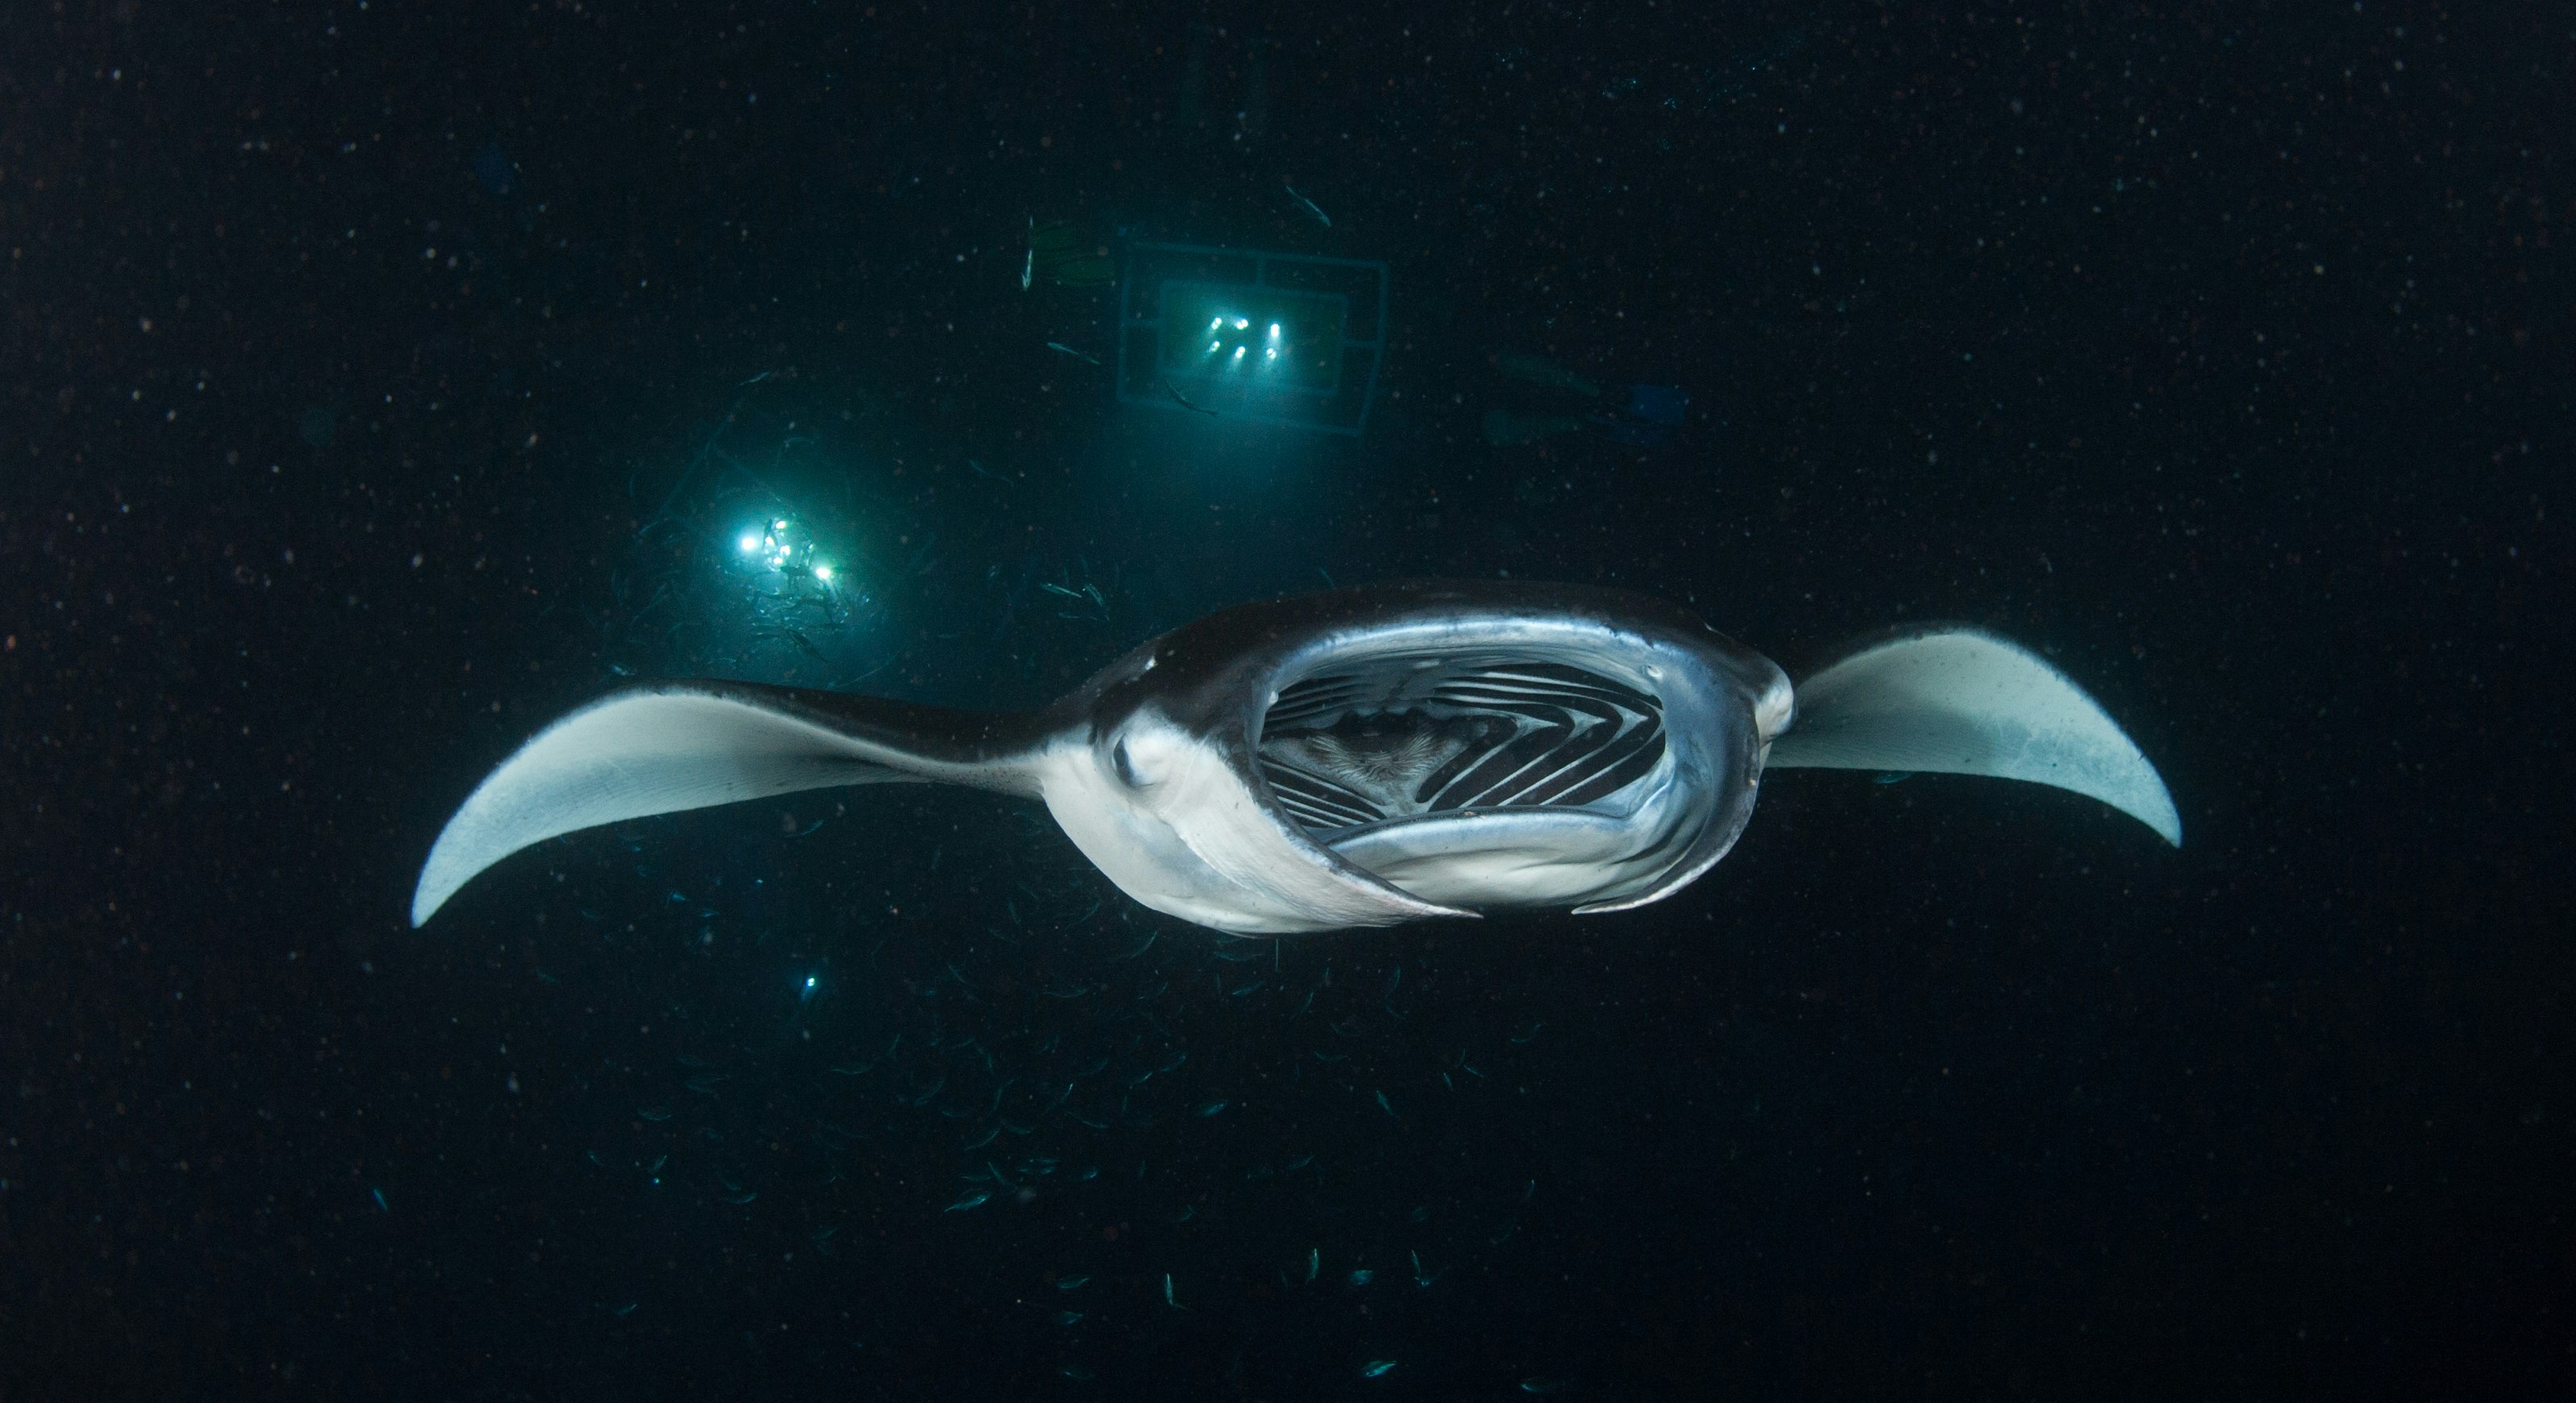 A gray and white manta ray is illuminated with lights in the inky black water during a night dive